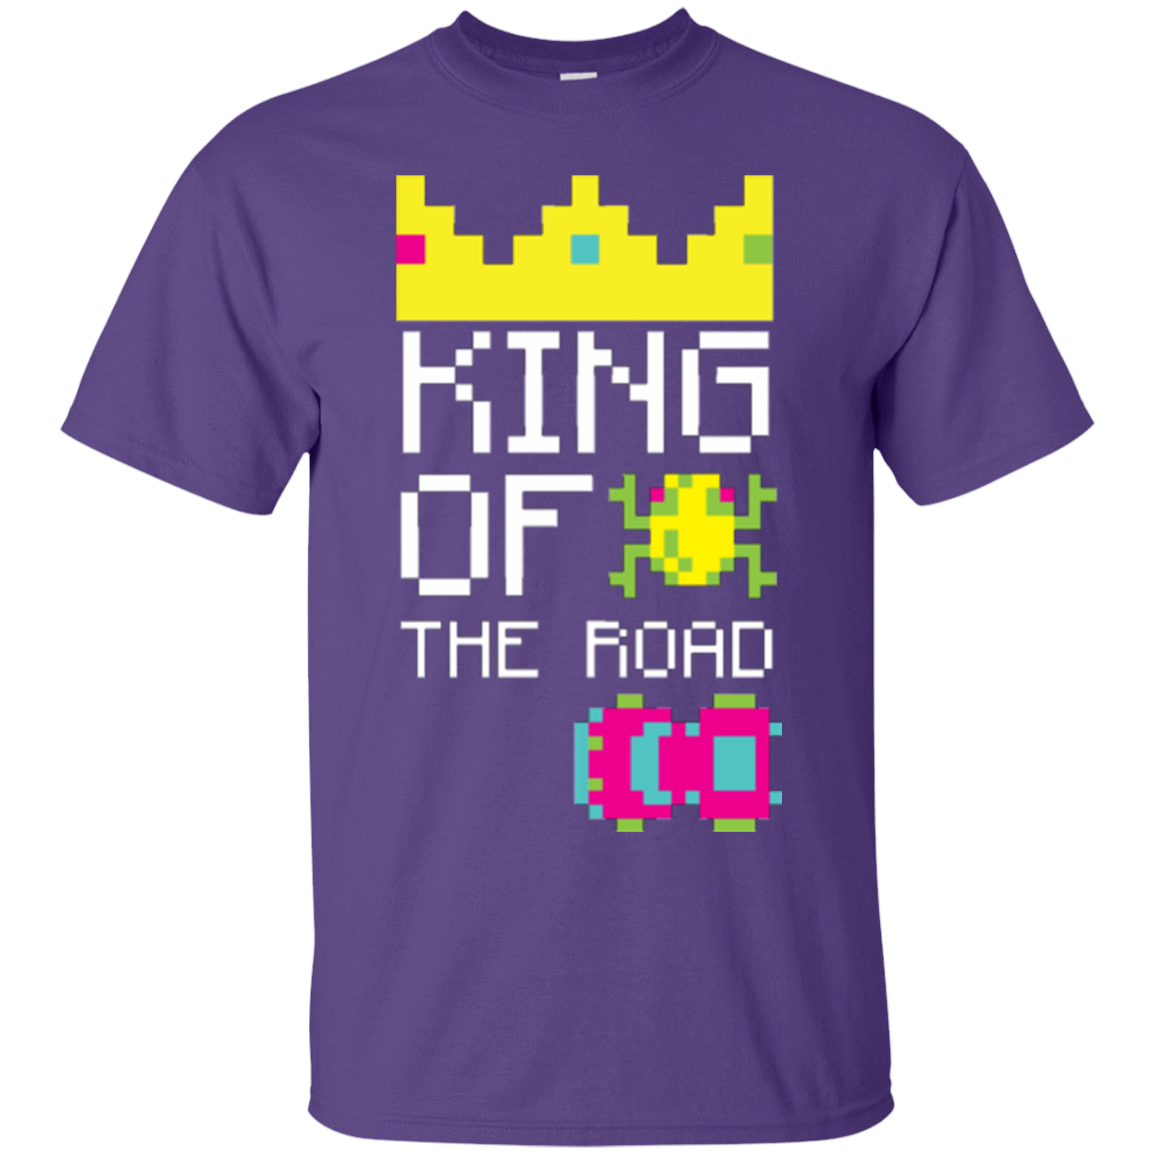 T-Shirts Purple / Small King Of The Road T-Shirt